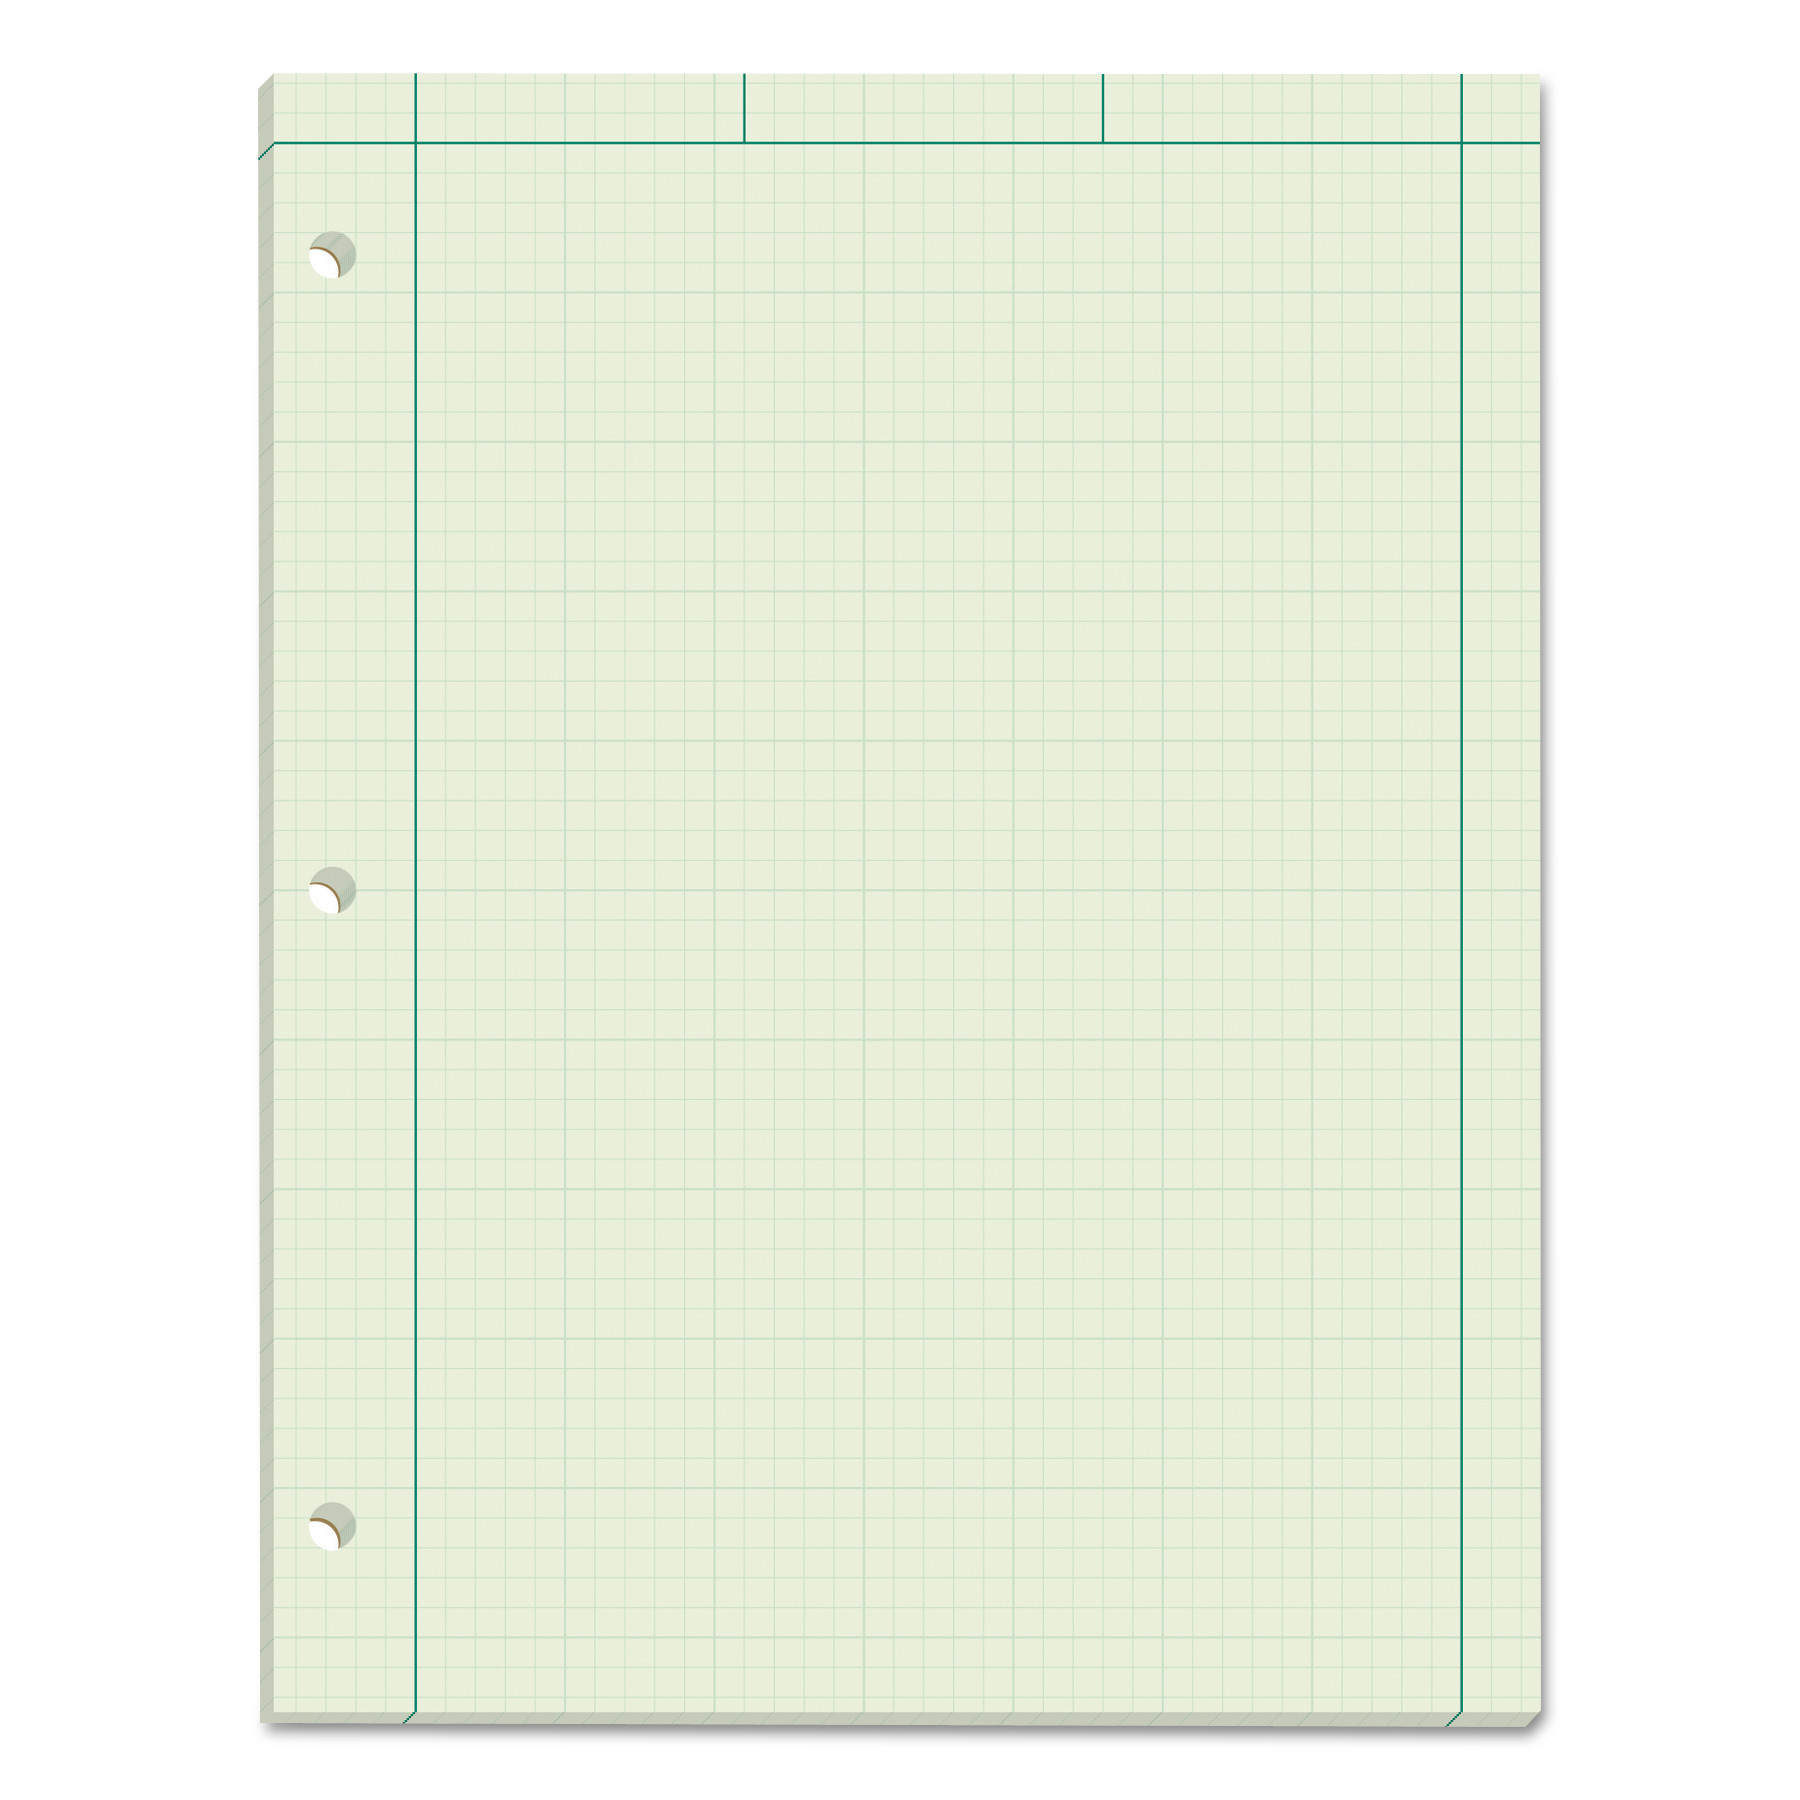  TOPS 35510 Engineering Computation Pads, 5 sq/in Quadrille Rule, 8.5 x 11, Green Tint, 100 Sheets (TOP35510) 